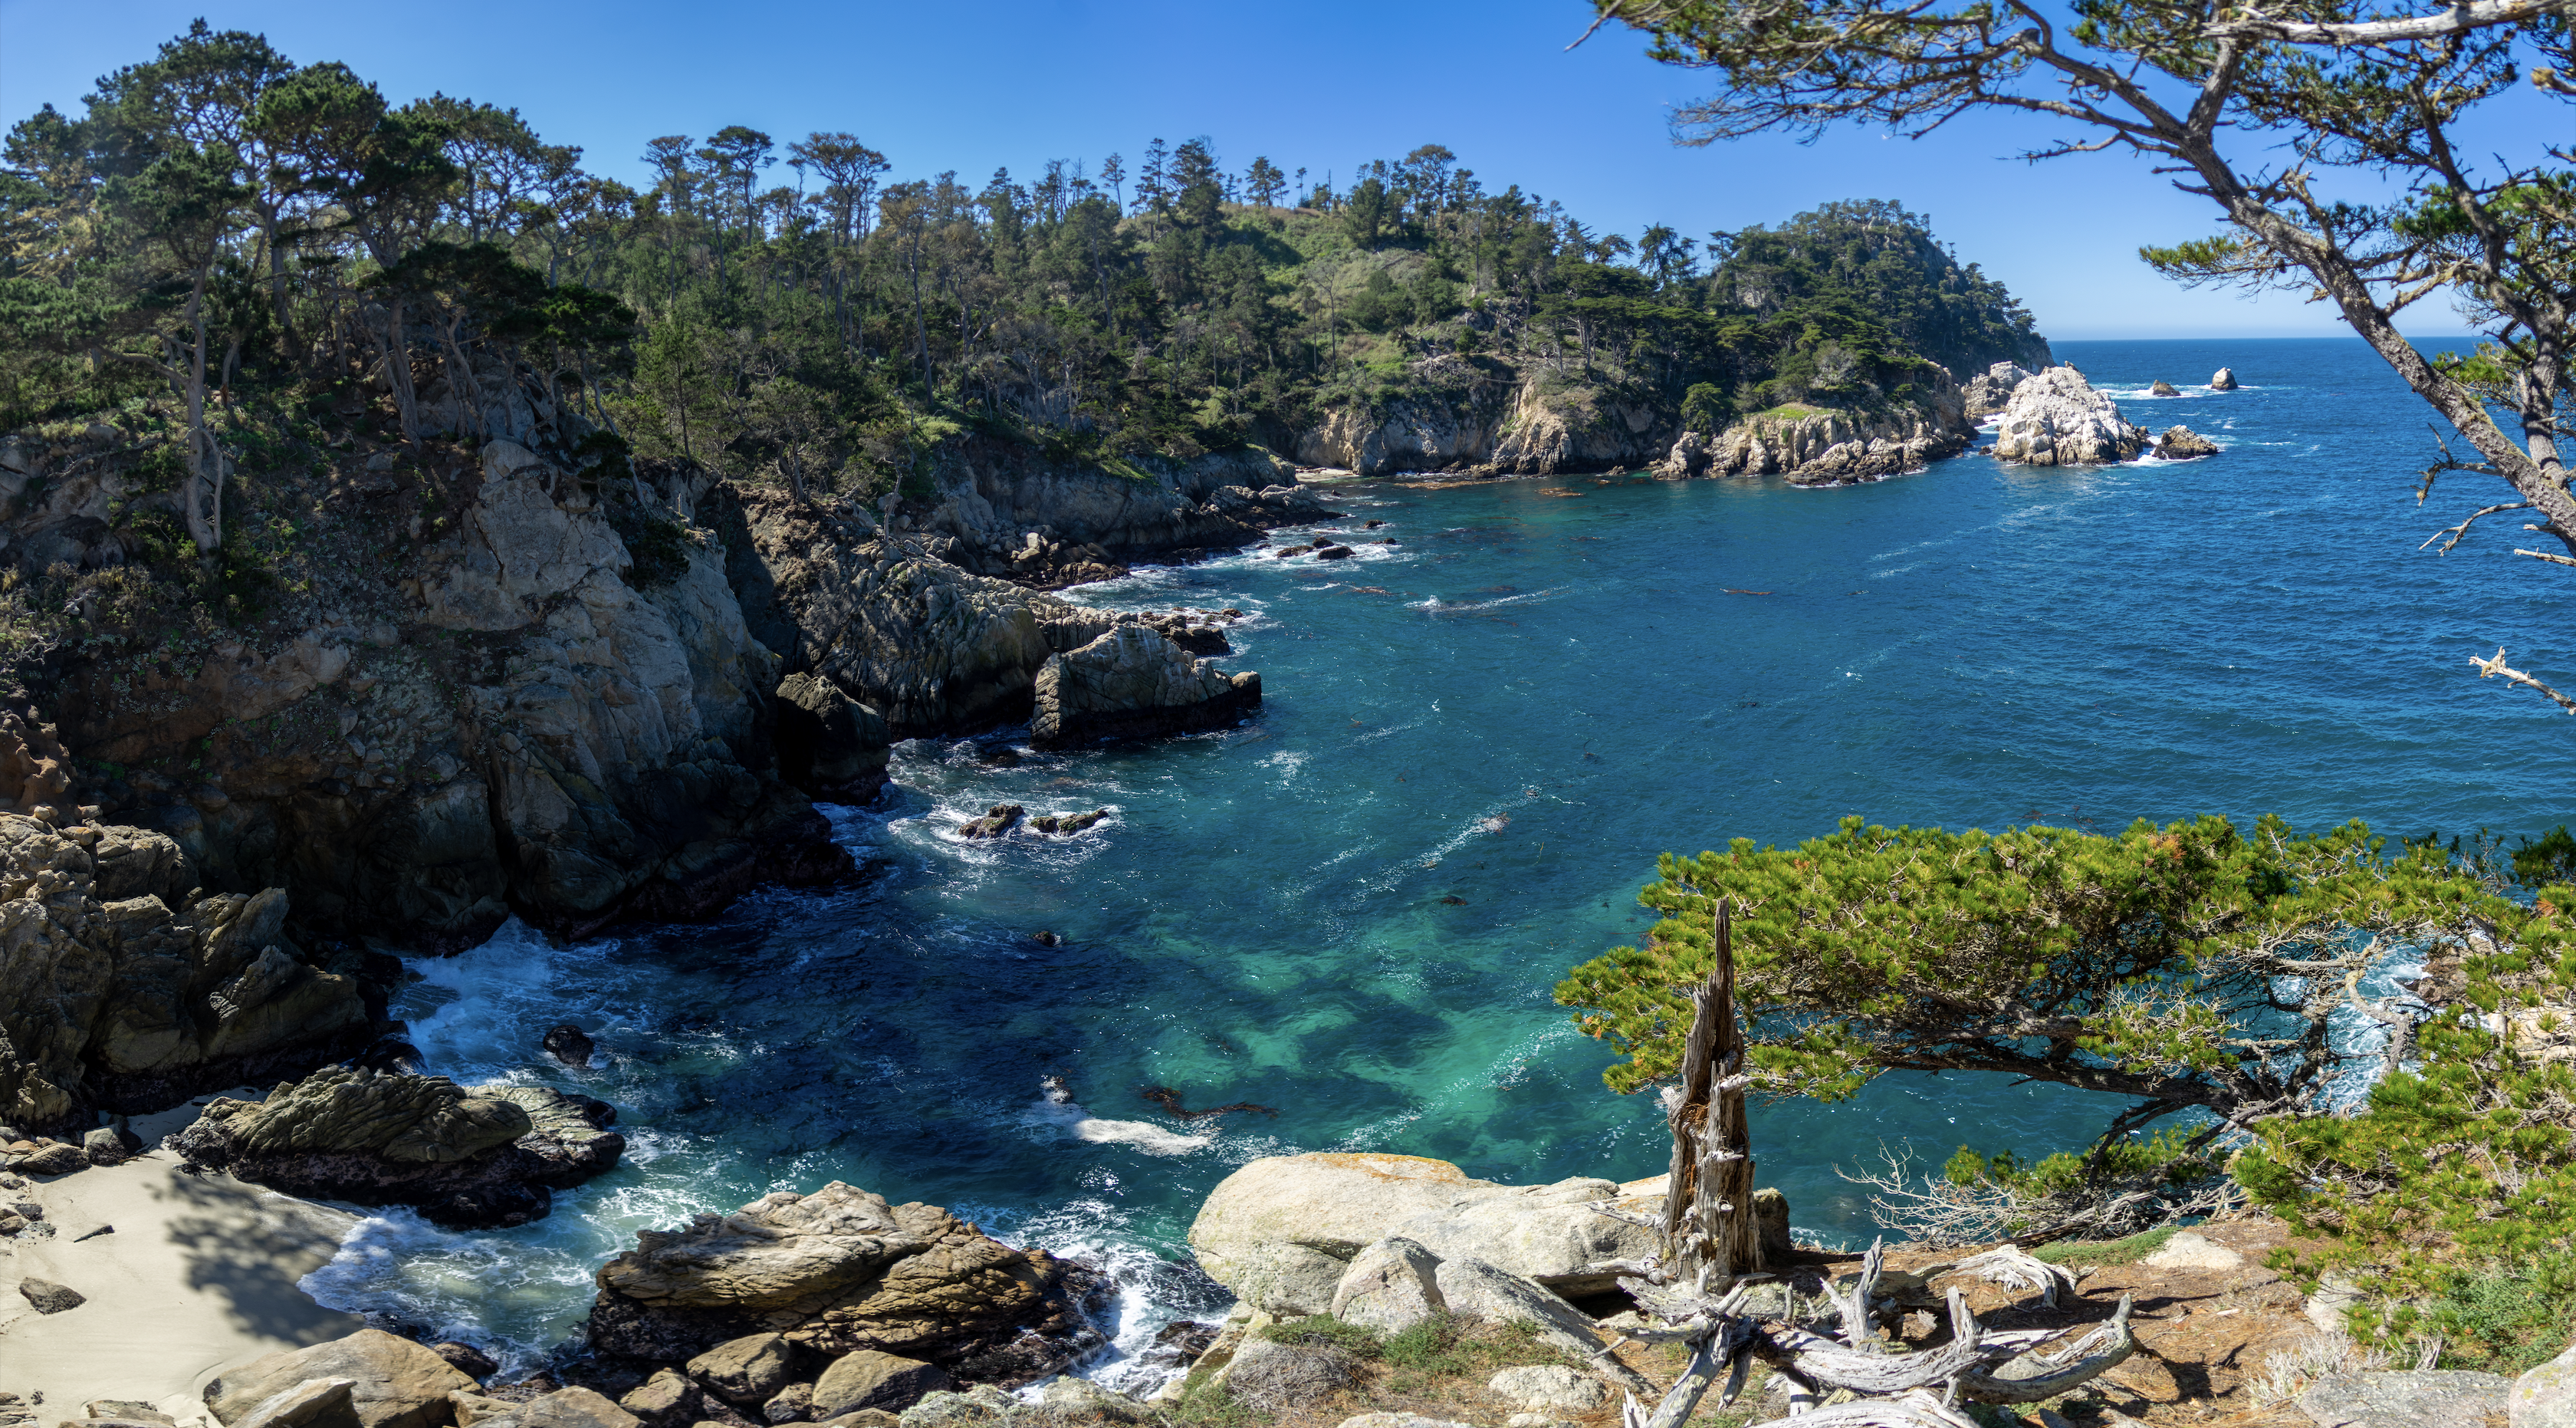 General 3360x1862 California USA landscape nature coast cliff sea Sunny forest shallows calm waters water